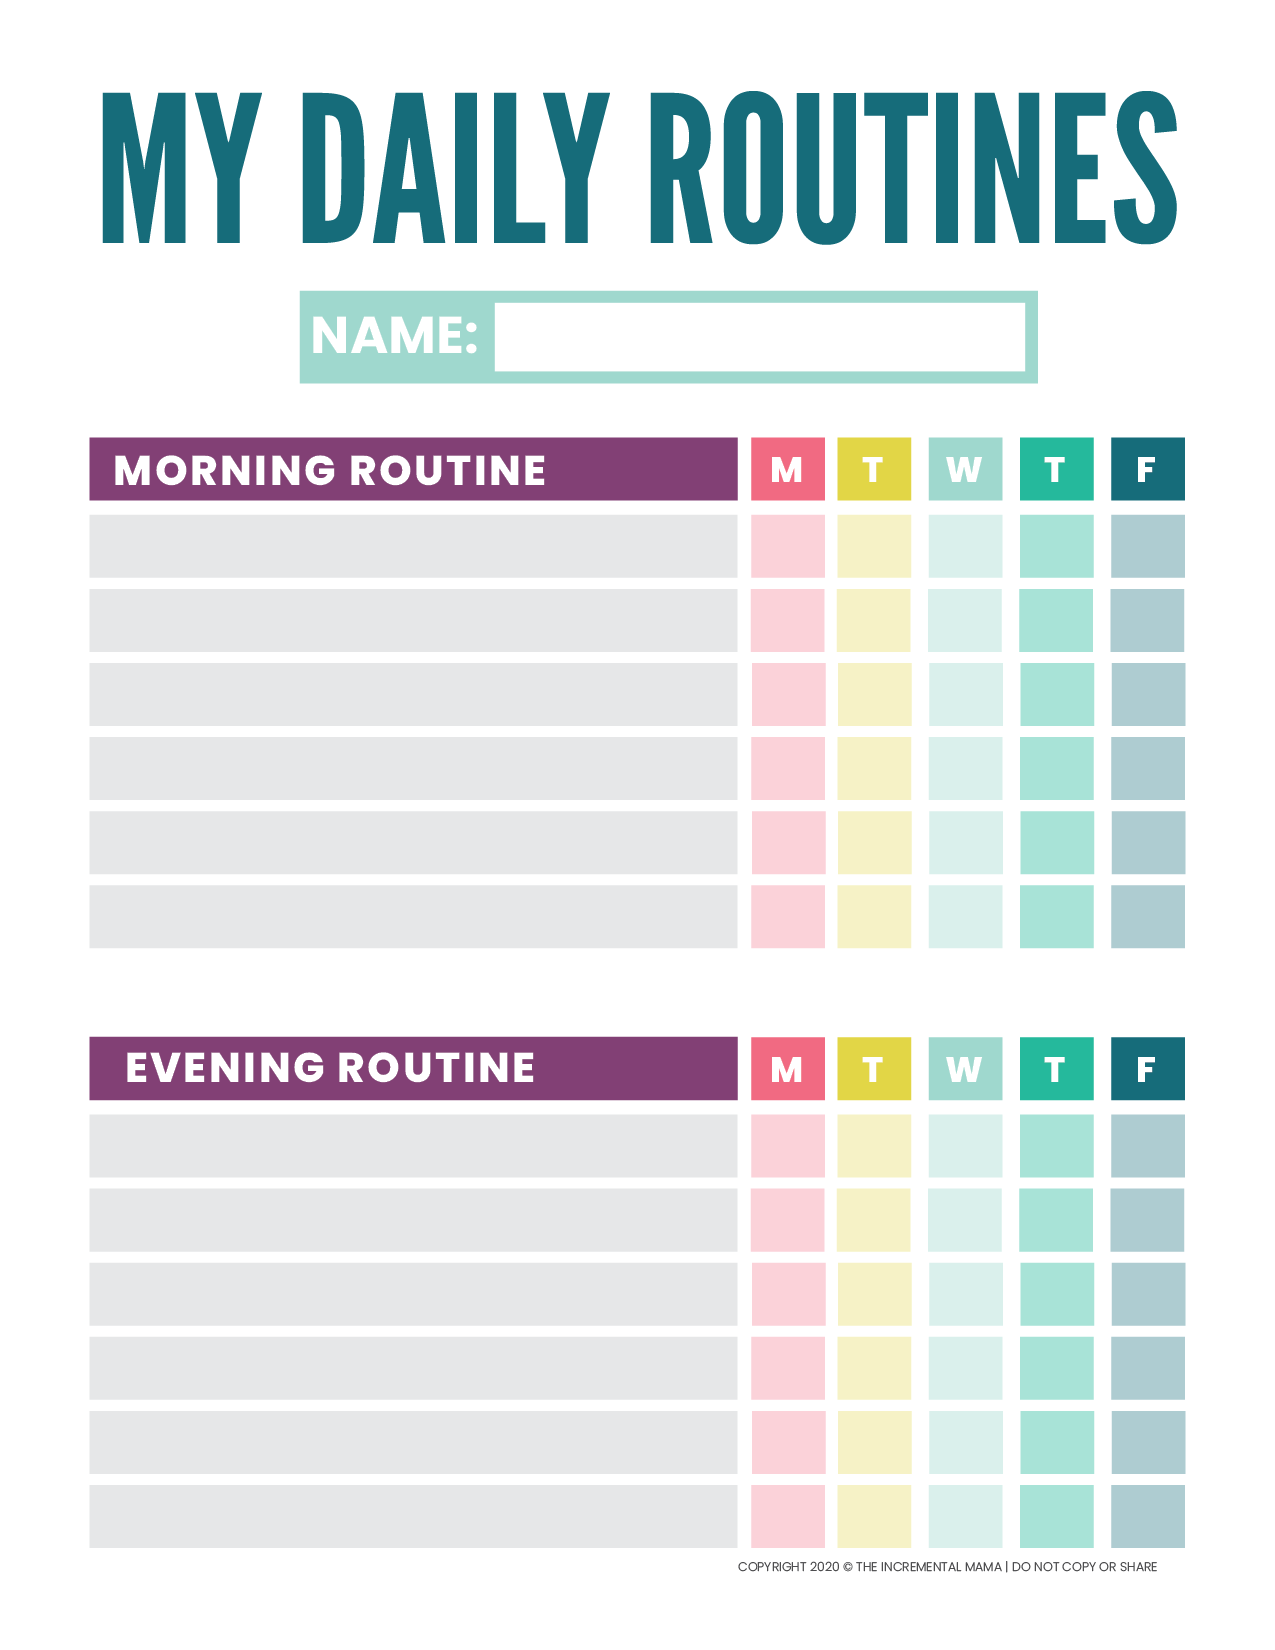 Printable Daily Routine Schedule